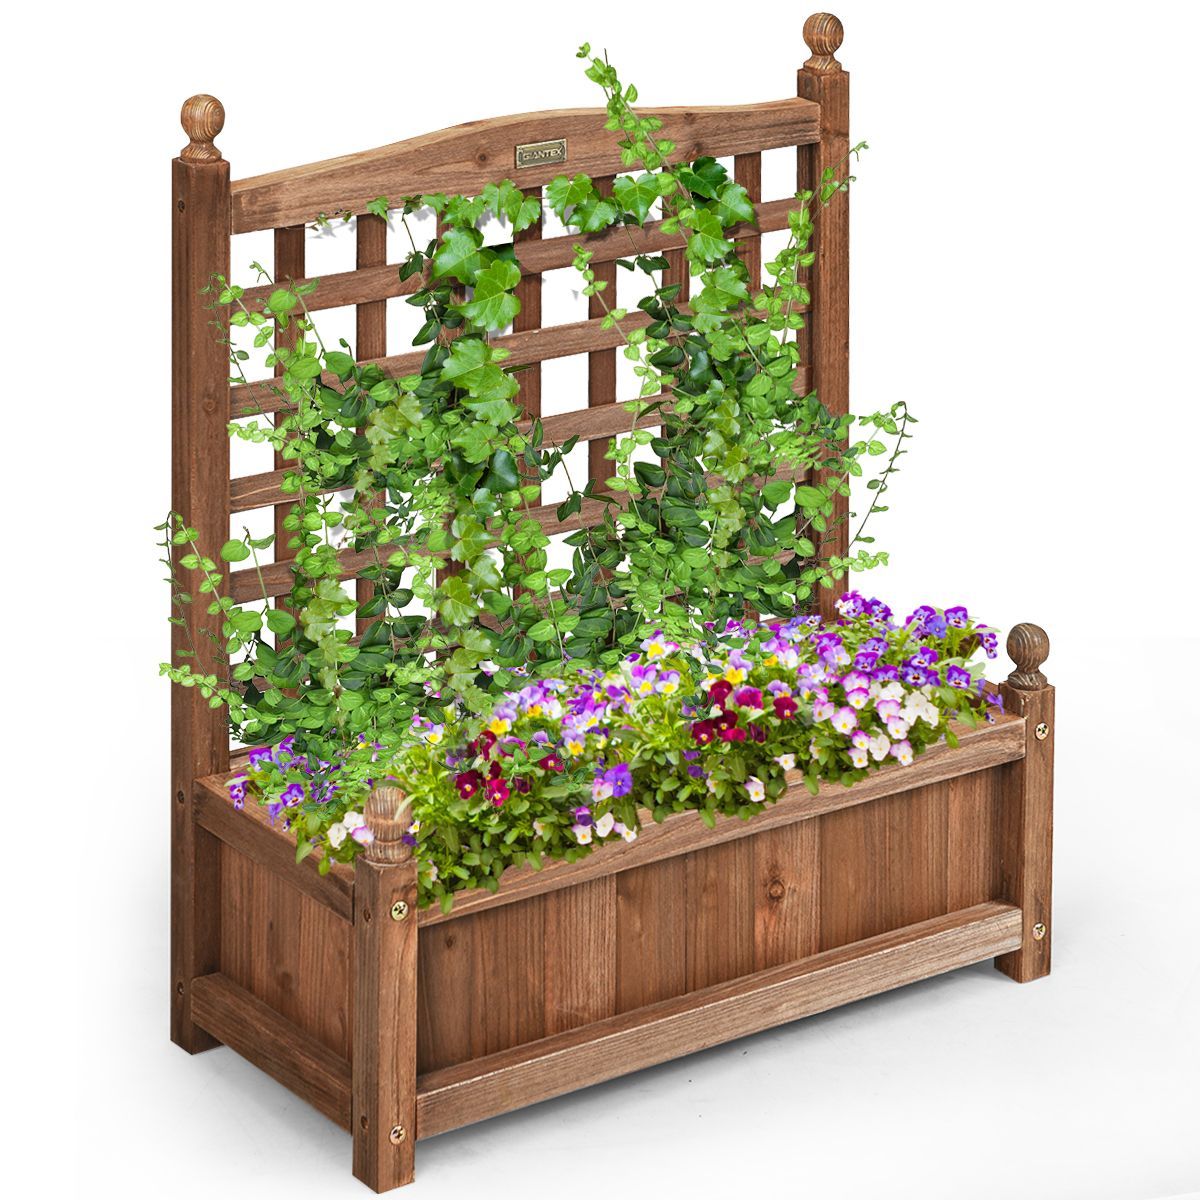 Costway Solid Wood Planter Box with Trellis Weather-Resistant Outdoor 25''x11''x30'' | Target